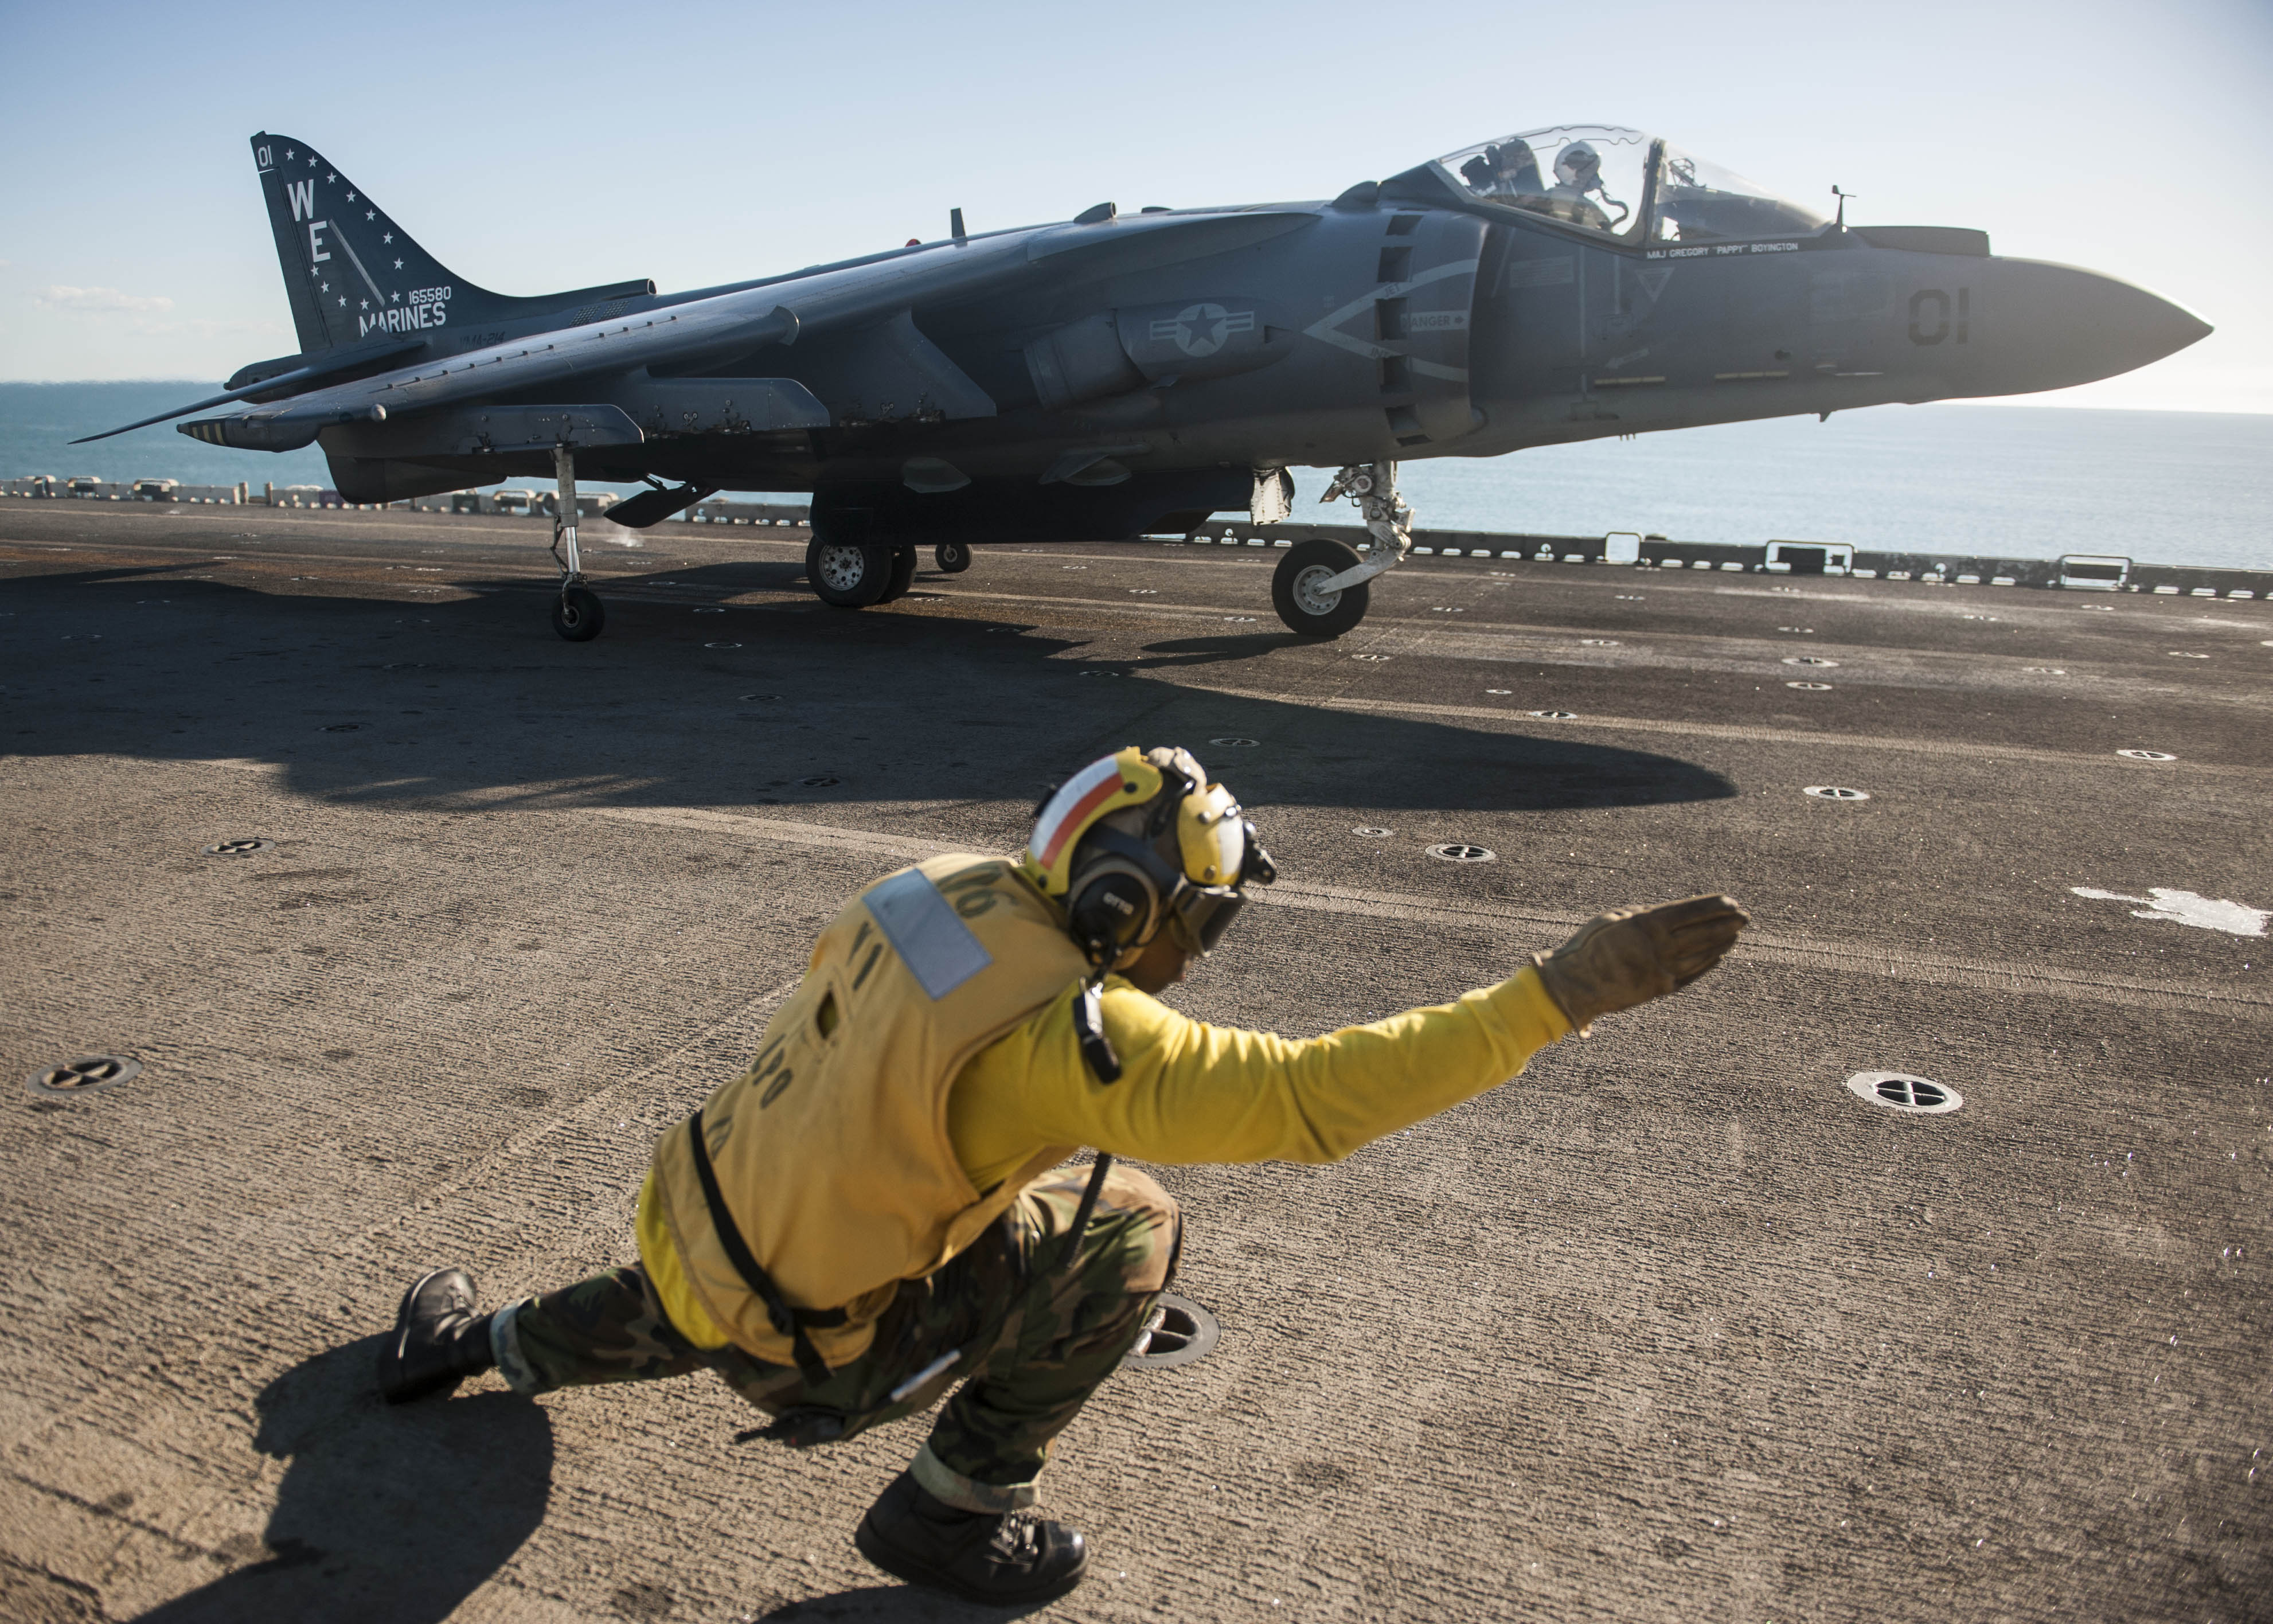 An AV-8B Harrier from the Black Sheep of Marine Attack Squadron (VMA) 214 on the flight deck of the amphibious assault ship USS Bonhomme Richard (LHD-6) on Aug. 4, 2013. US Navy Photo